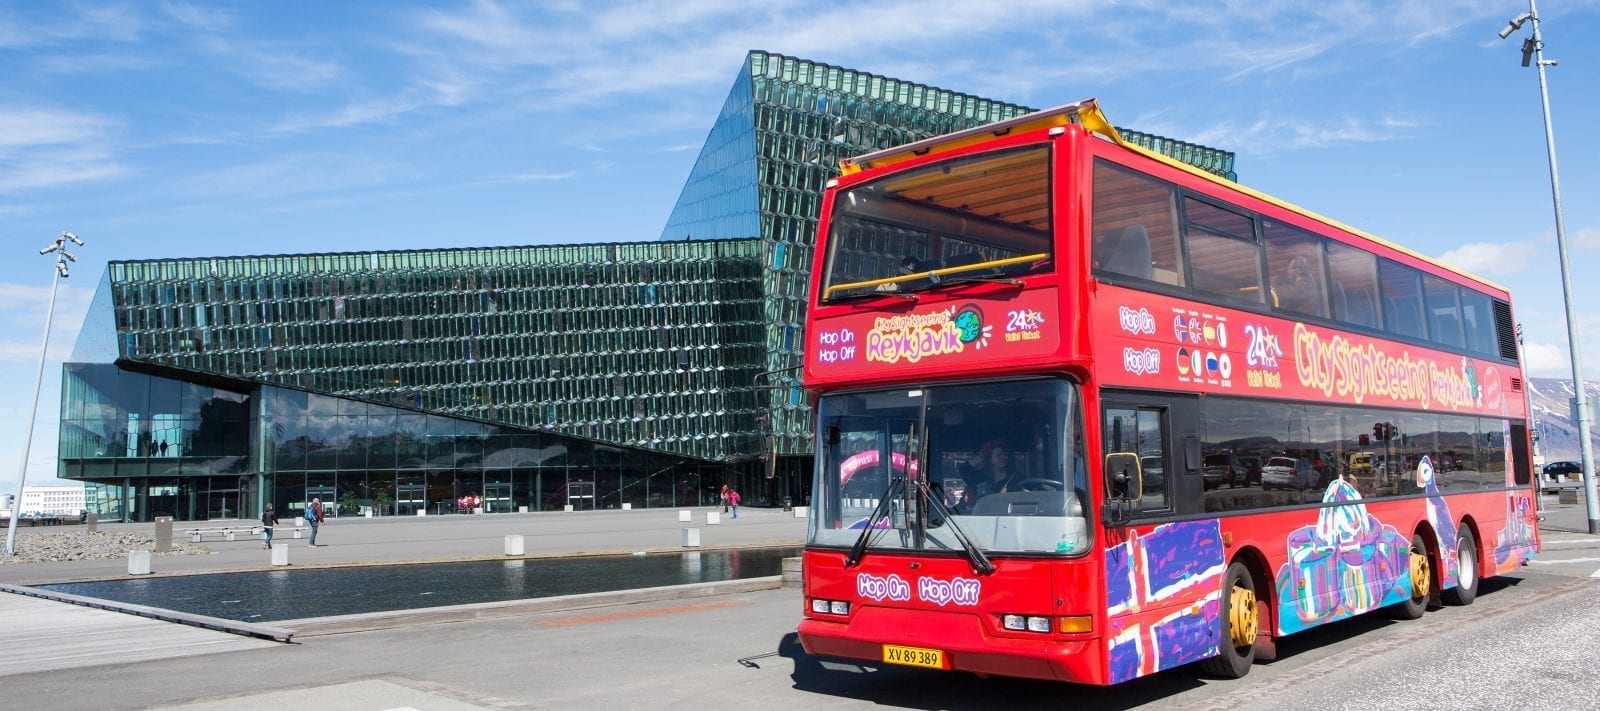 Hop On – Hop Off – City Sightseeing 24 hours